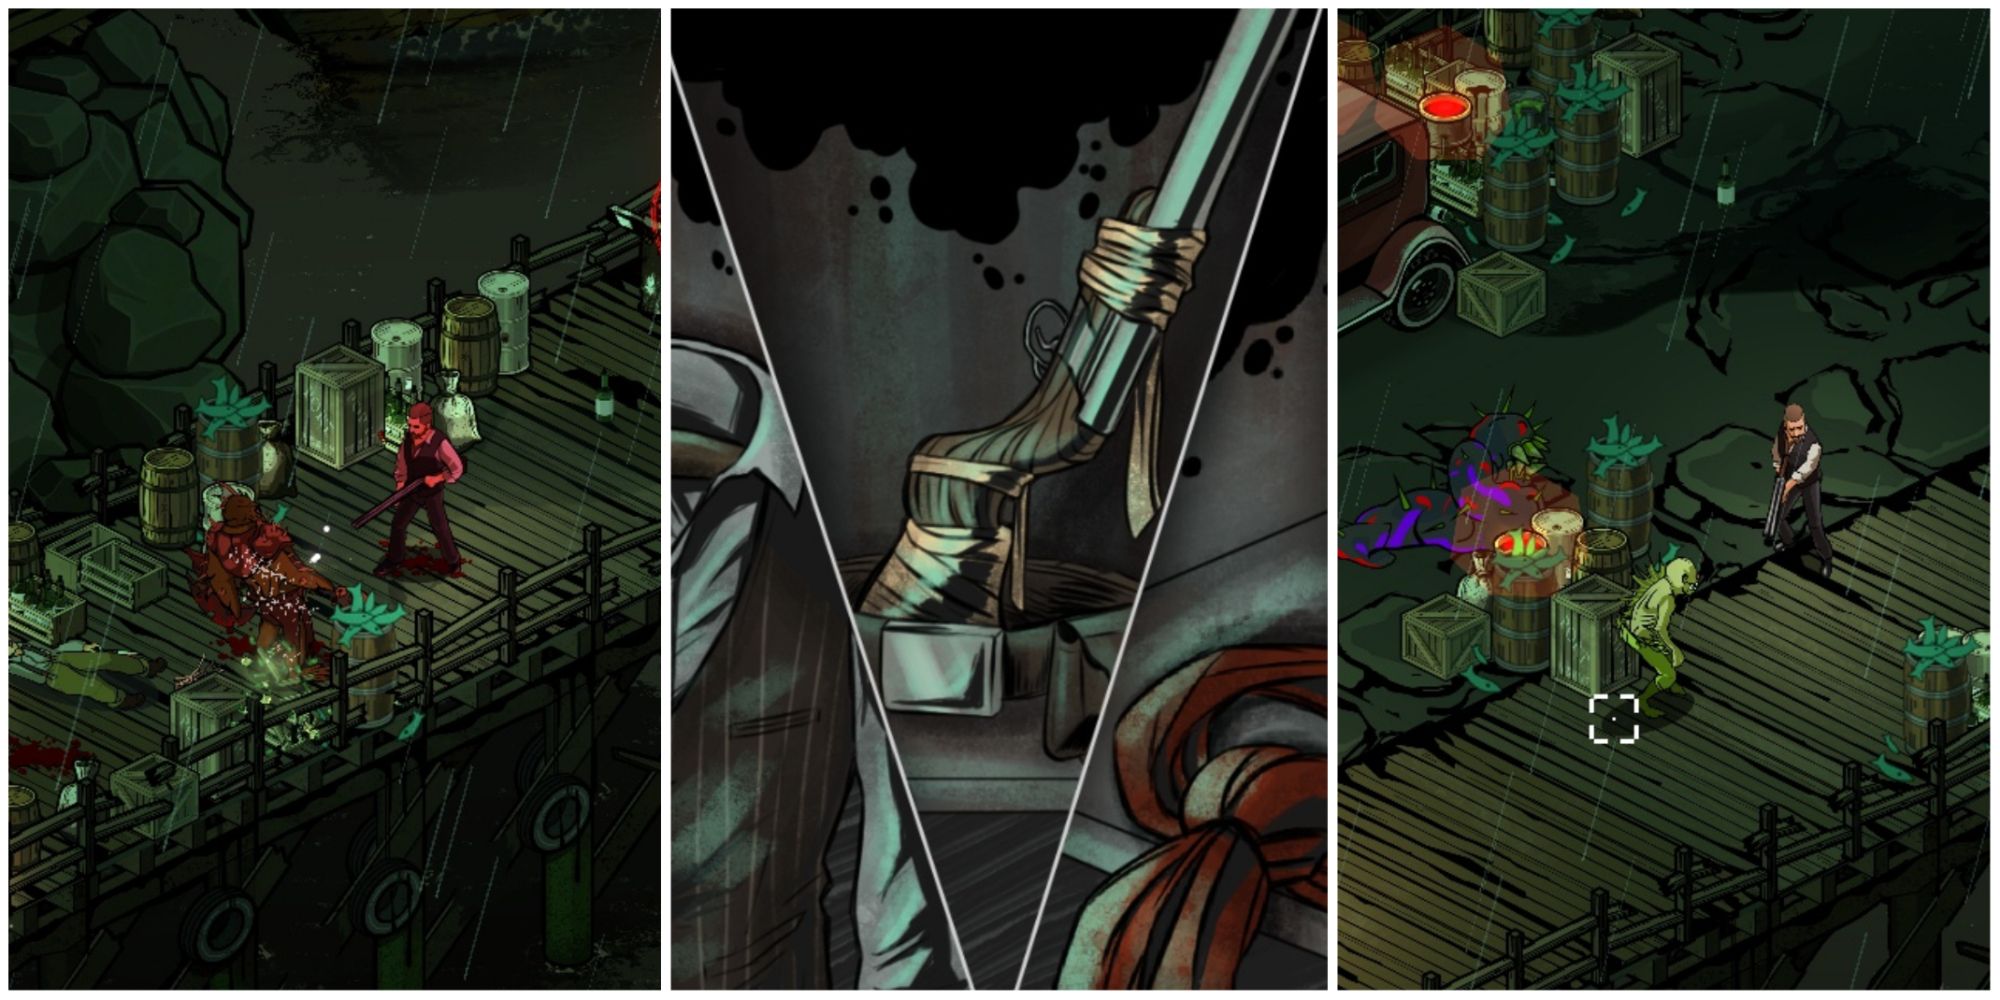 Lovecraft's Untold Stories 2 collage of the detective fighting, and a shotgun